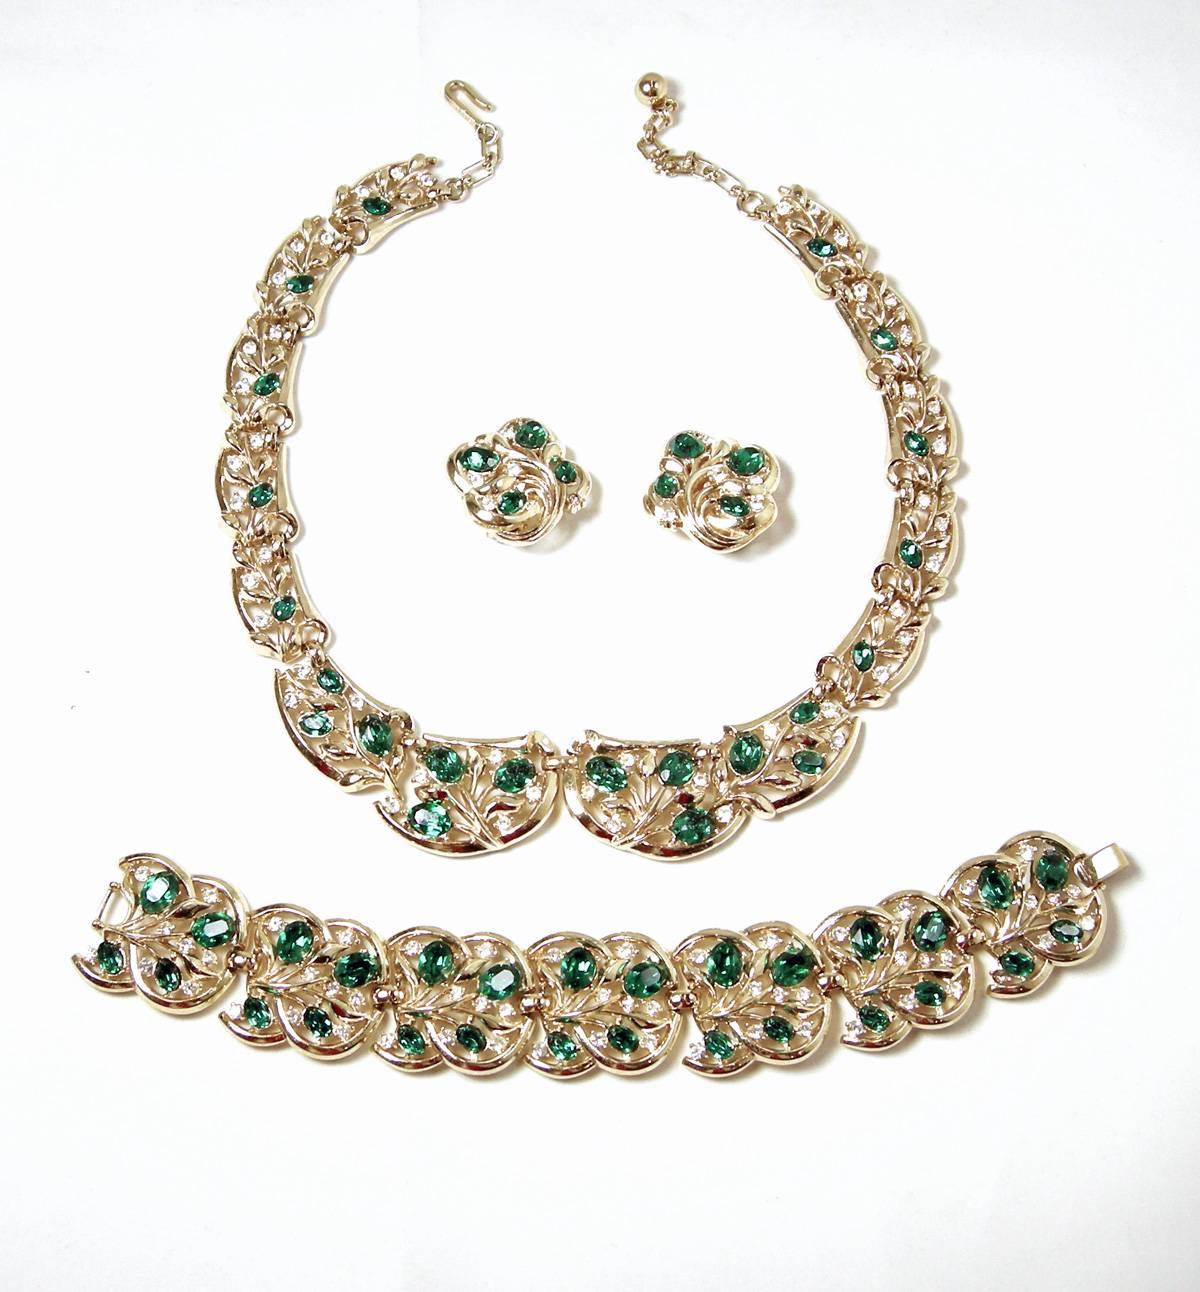 This is a beautiful vintage Trifari set with emerald green and clear rhinestones forming flowers in each segment.  There are five segments on each side, then they graduate to larger segments to the middle.  It is 16” with a hook clasp.  The middle